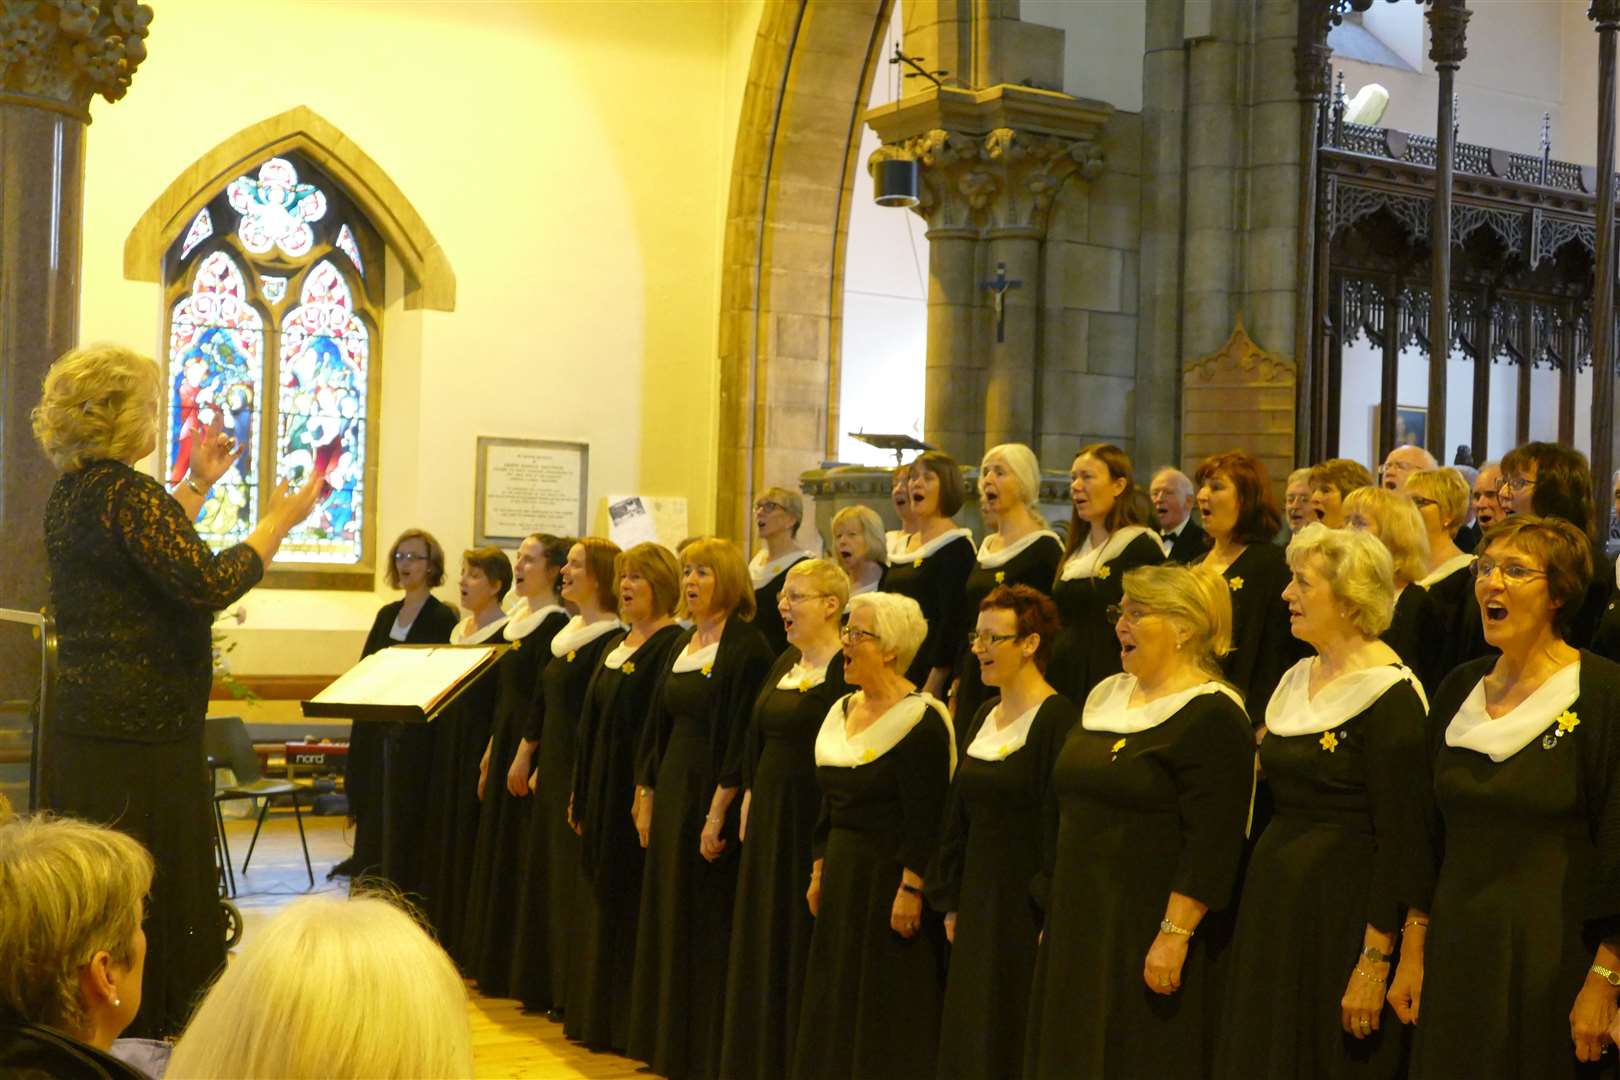 Glasgow Phoenix Choir performing at Inverness Ness Bank Church in 2019.